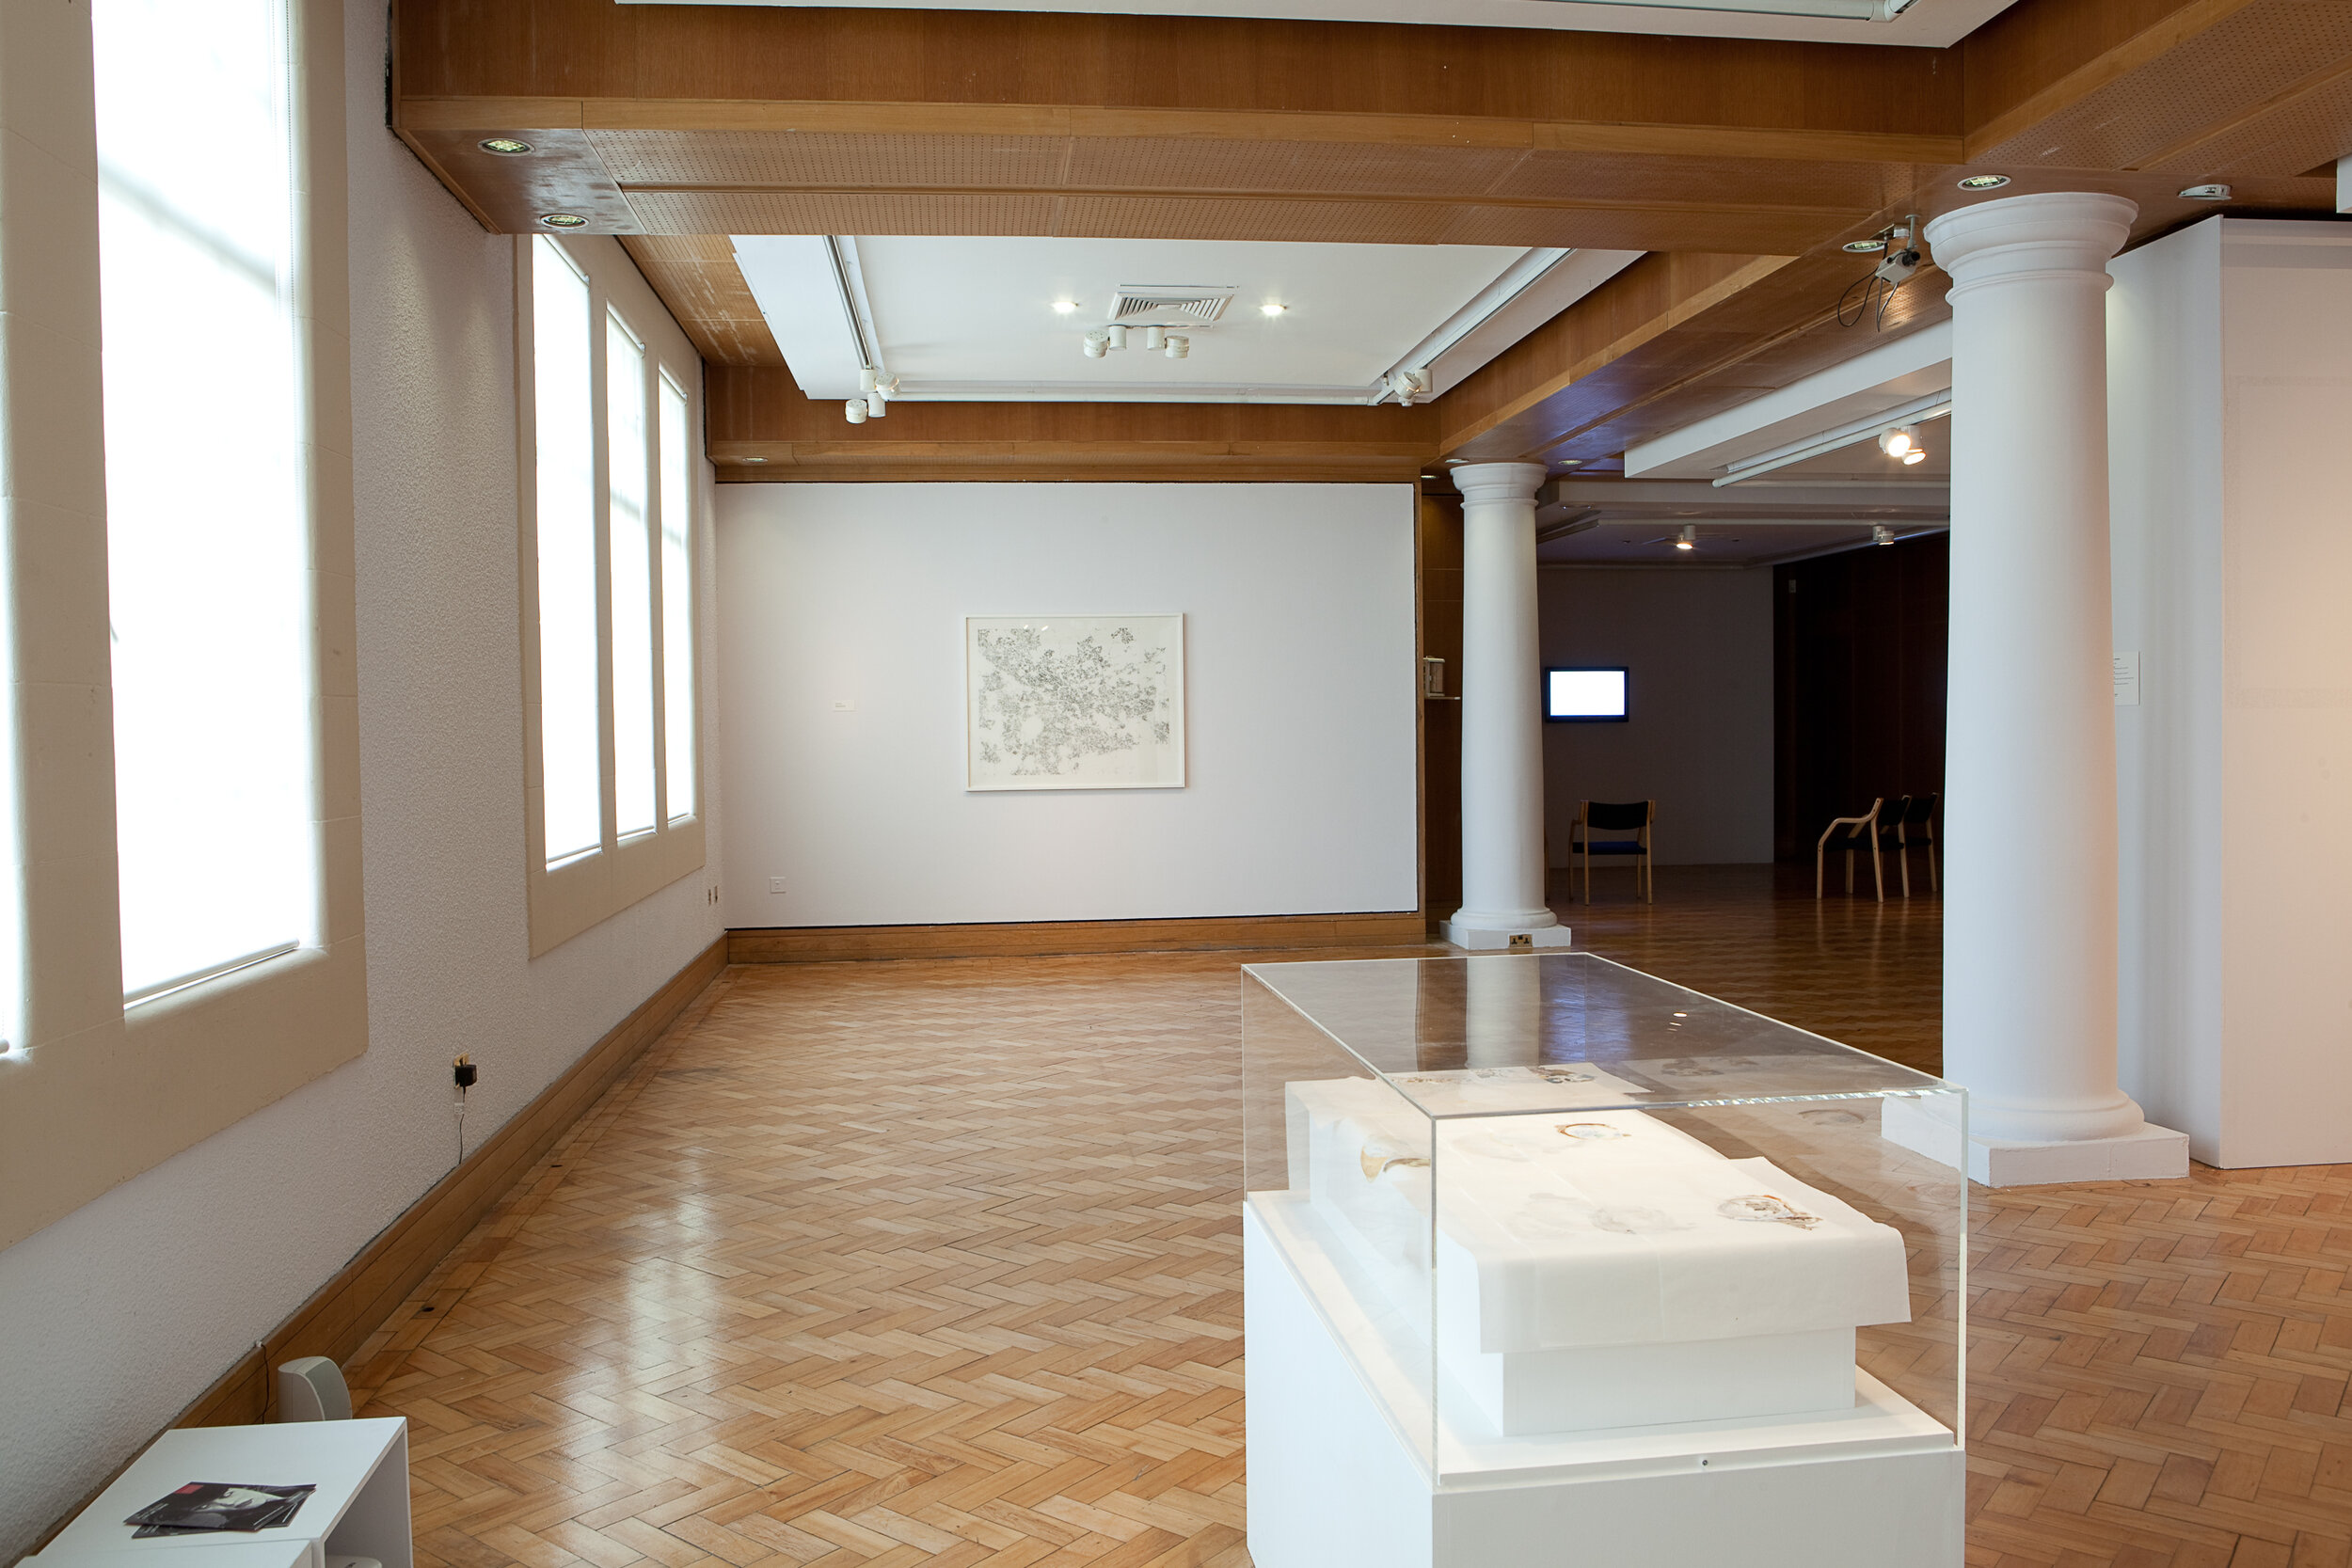 13. Nathalie De Briey and Layla Curtis - Installation View.jpg